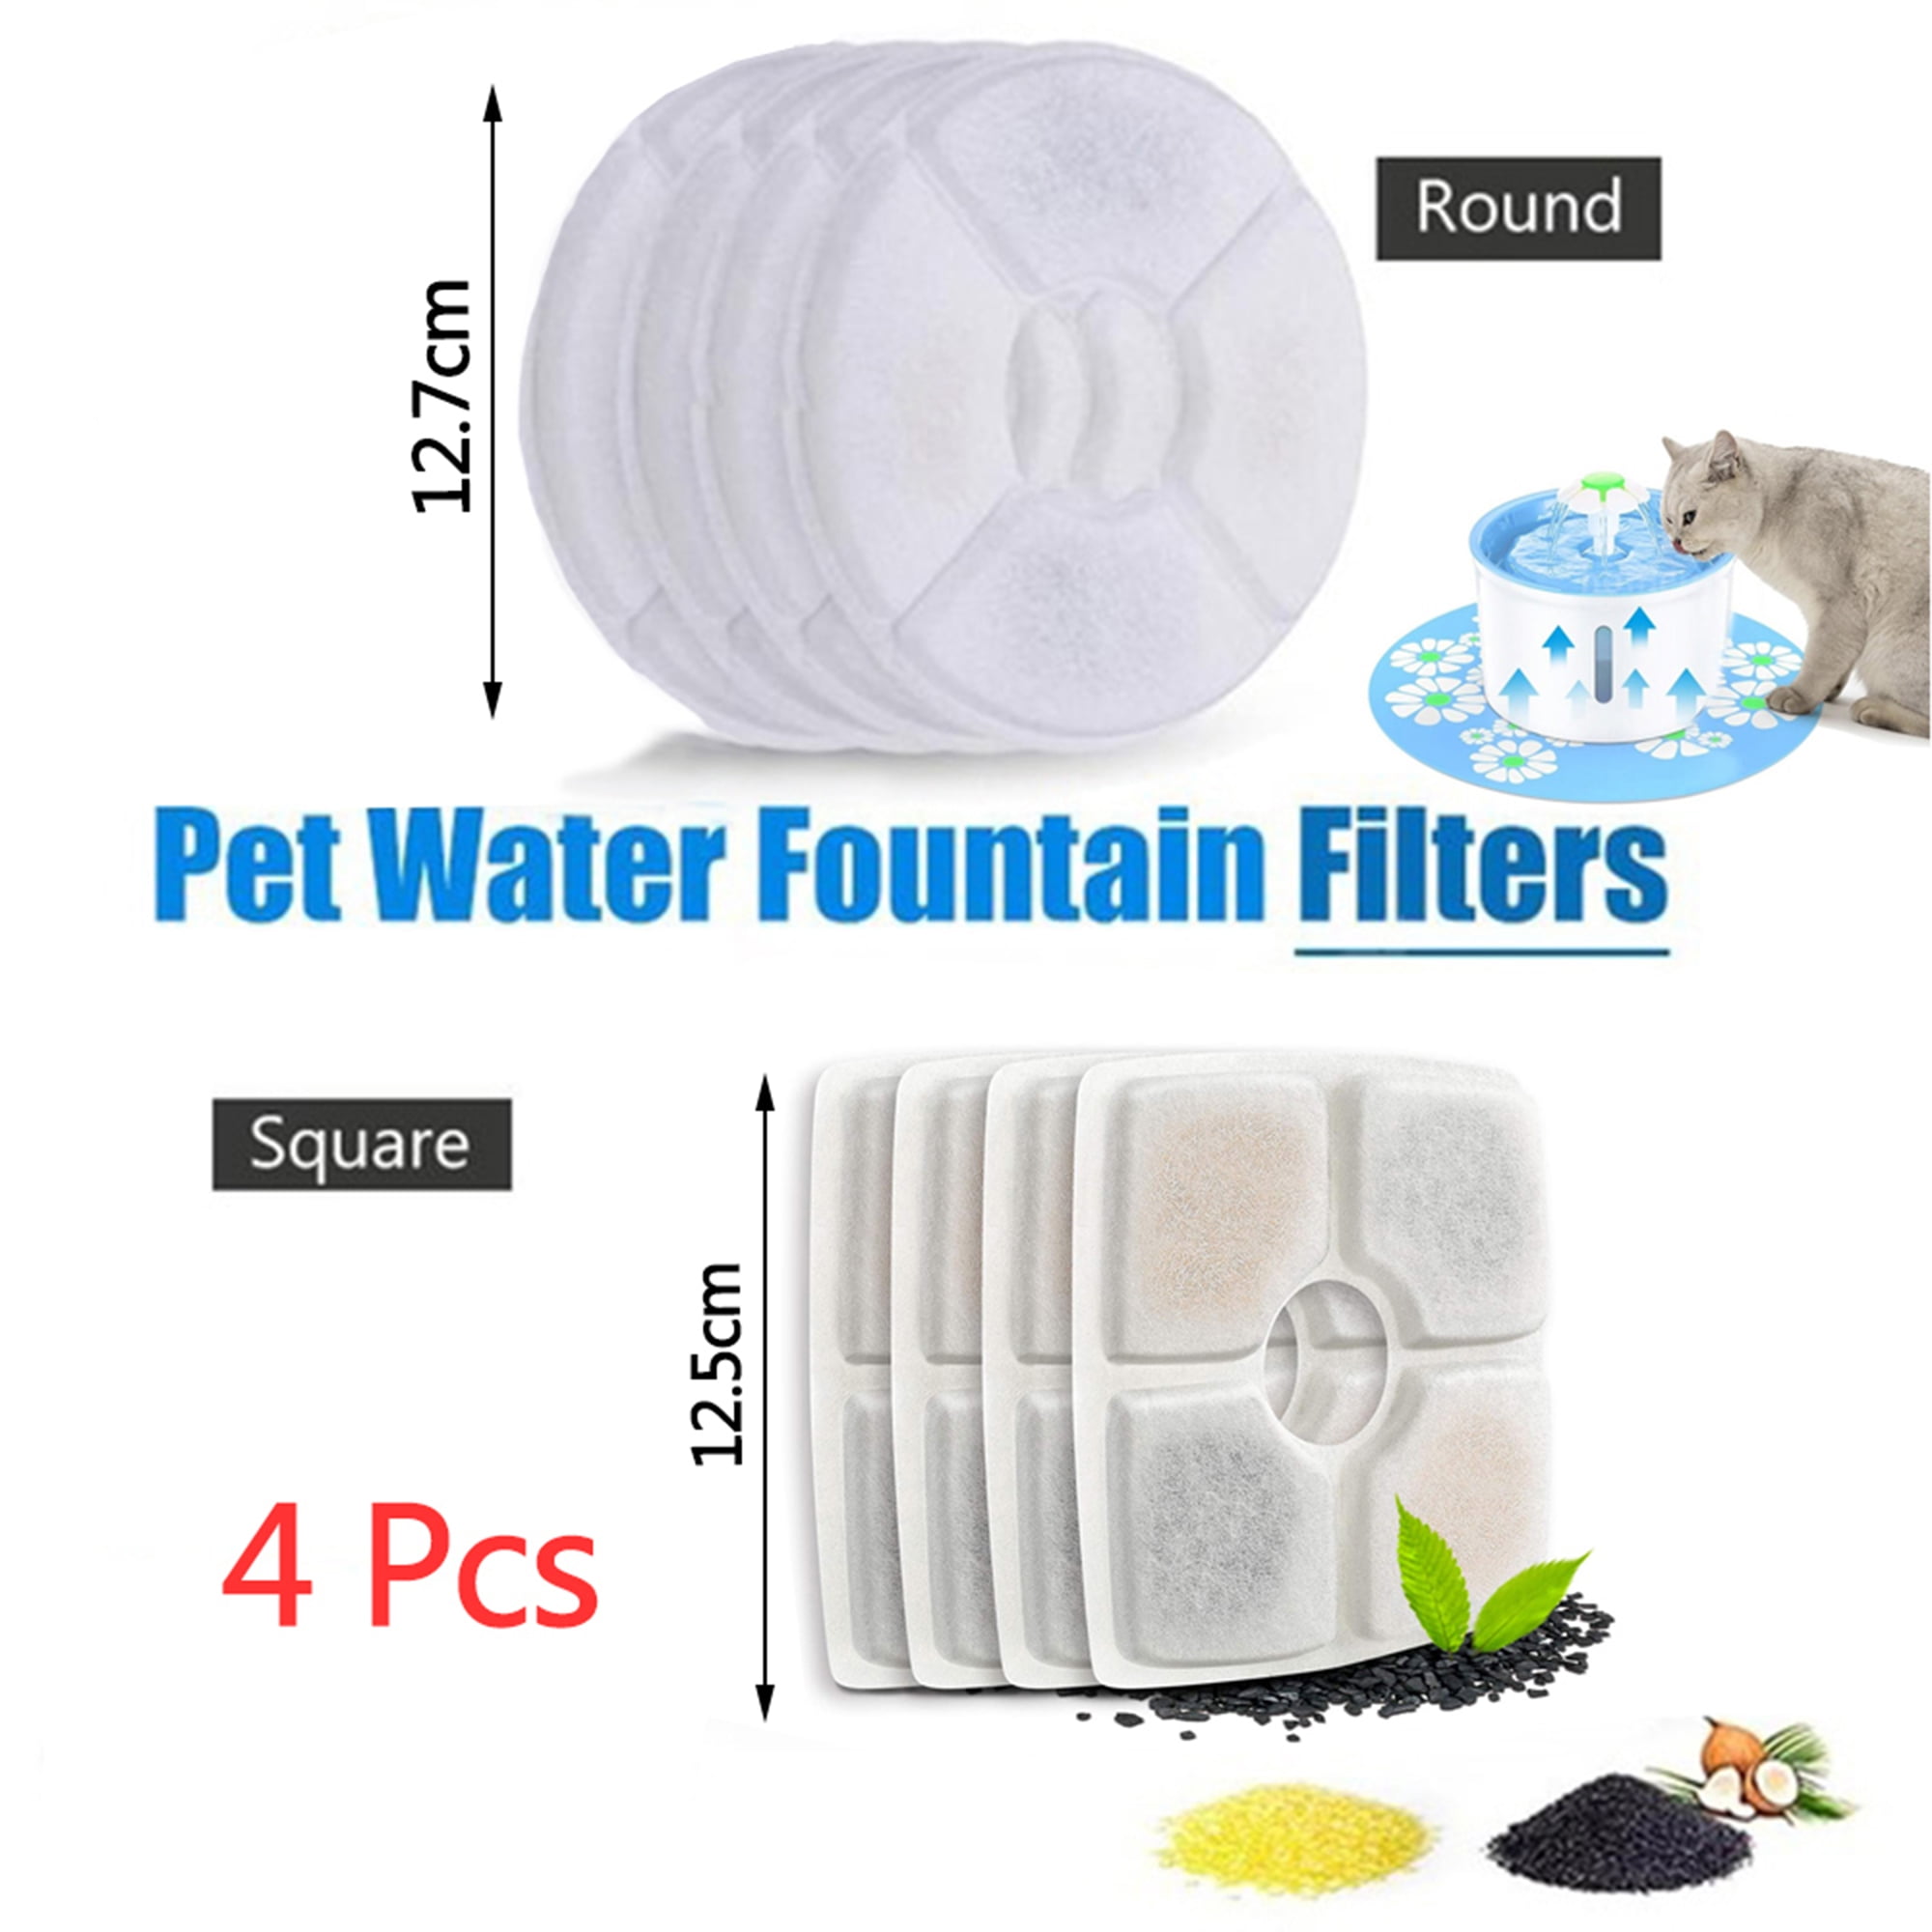 12 Pack Replacement Carbon Filters for Pet Fountain Multiple Pets Dogs Cat Water Fountain Filter Replacement Water Fountain Filter Efficient Quadruple for Cats 